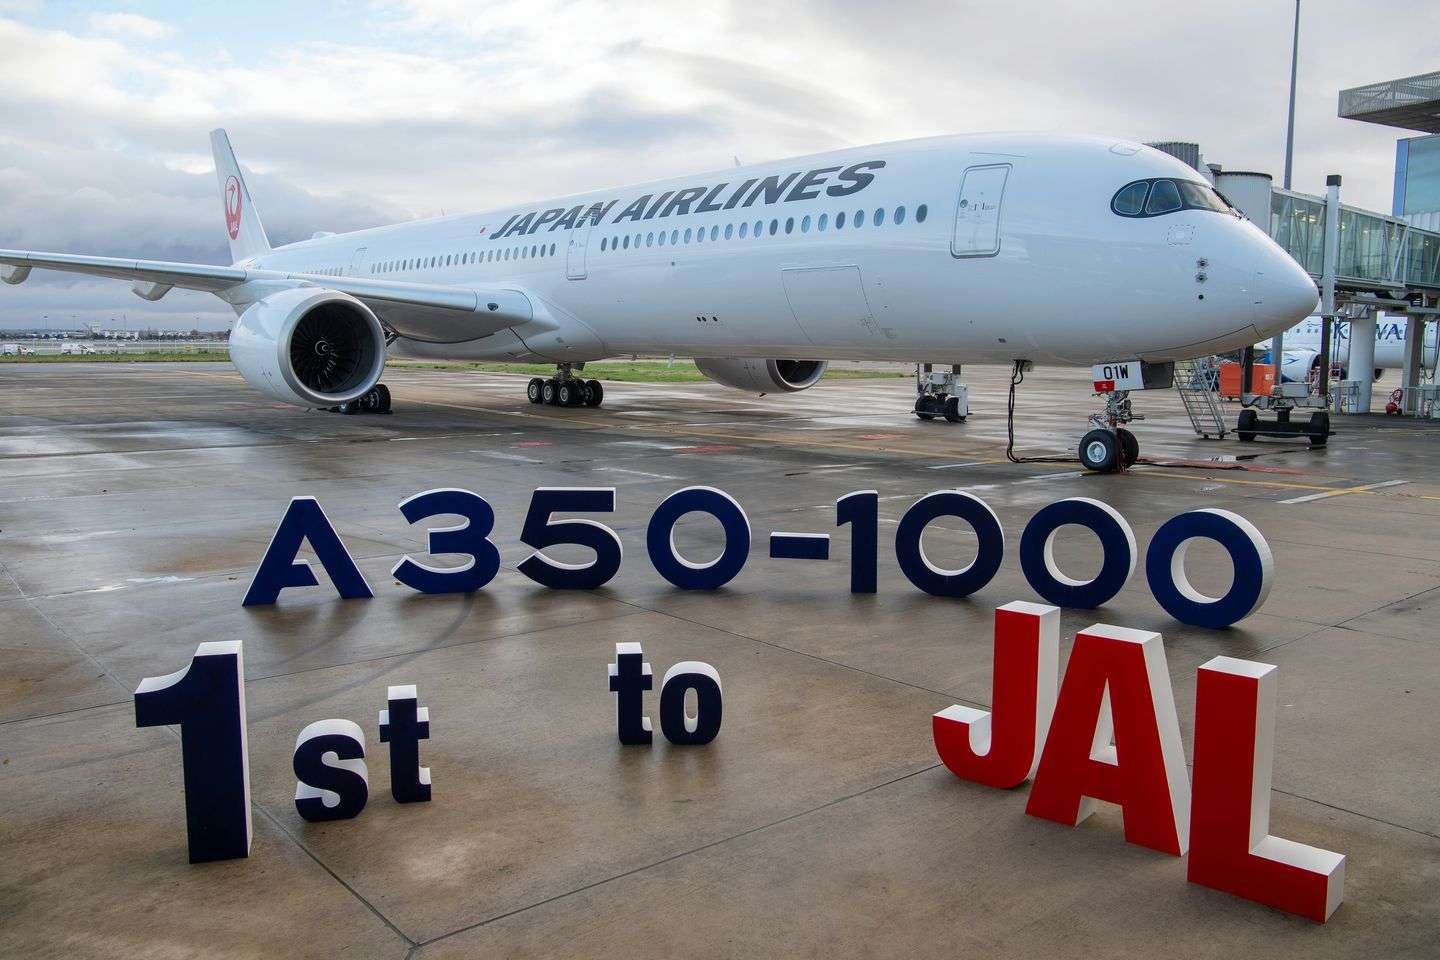 Toulouse to Tokyo: Japan Airlines Receives 1st Airbus A350-1000